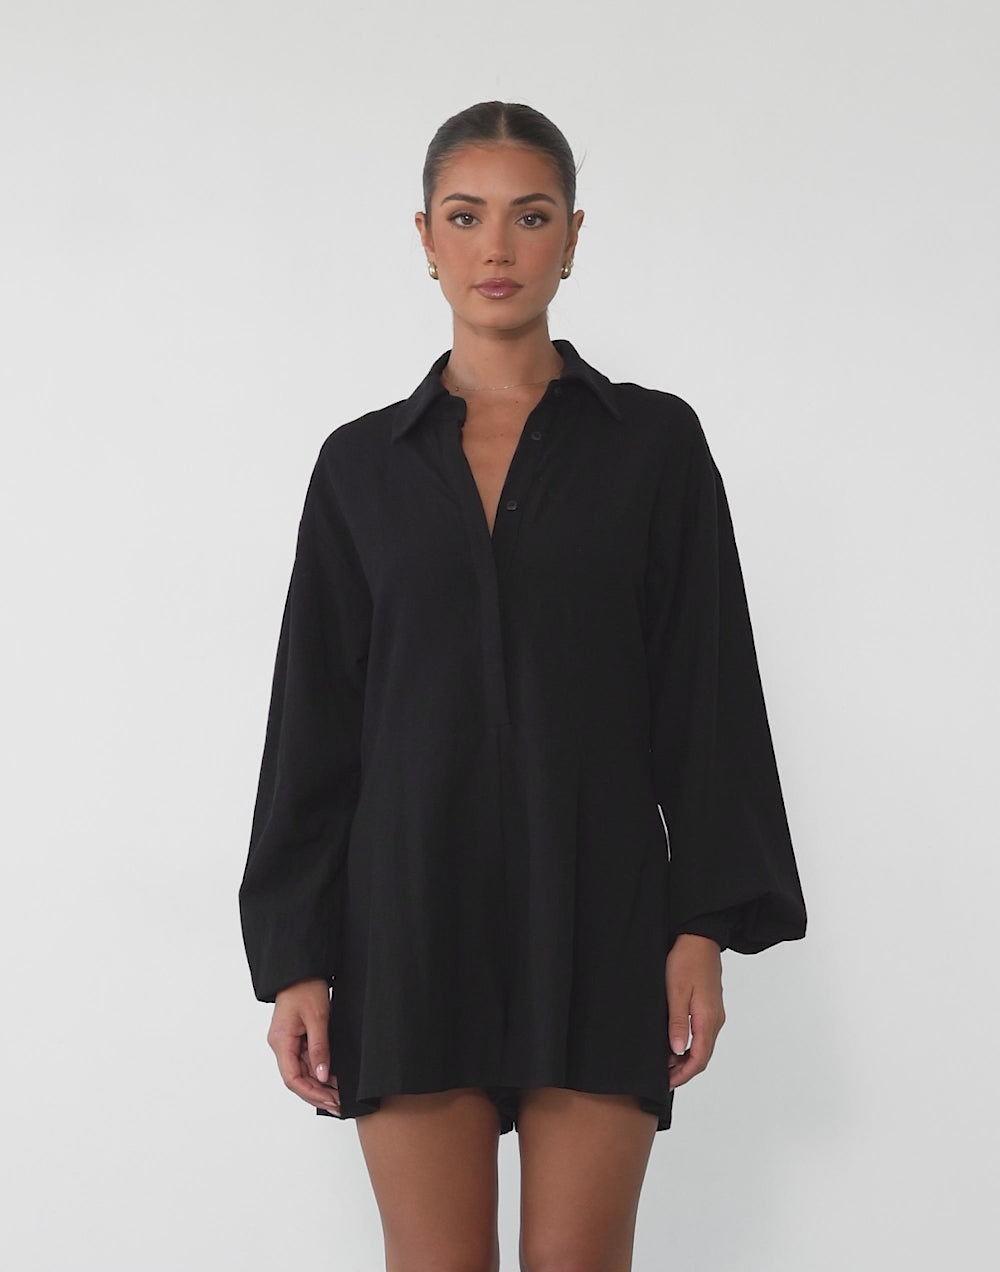 Take Your Time Playsuit (Black)